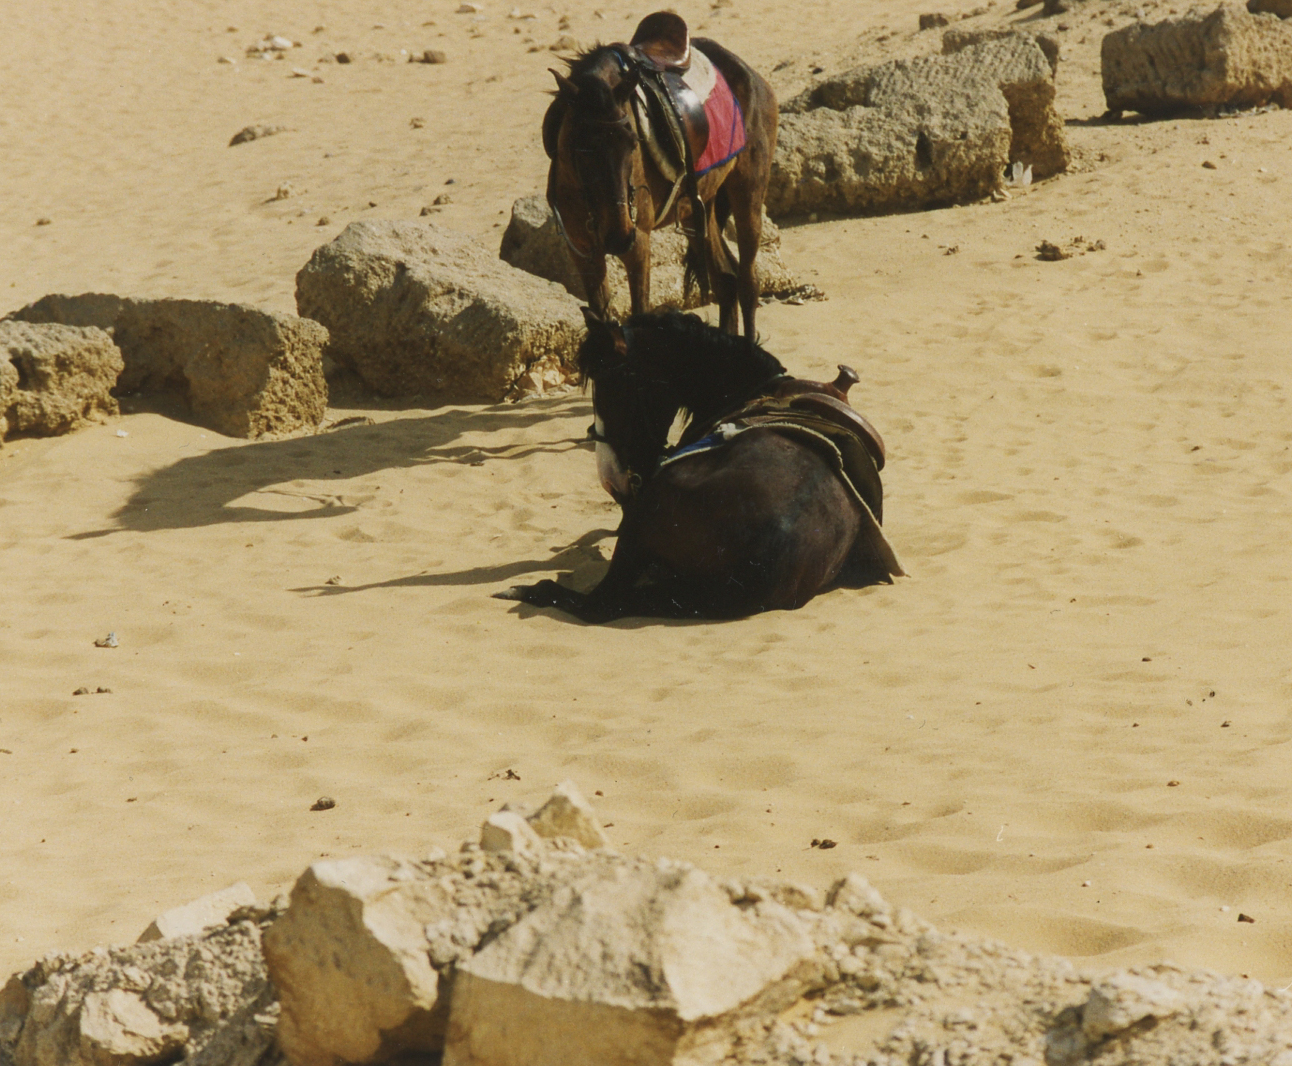 The half Arabian I did ride.
Every time I got off, he laid down…Photos of Egypt ©1998 Ann James Massey